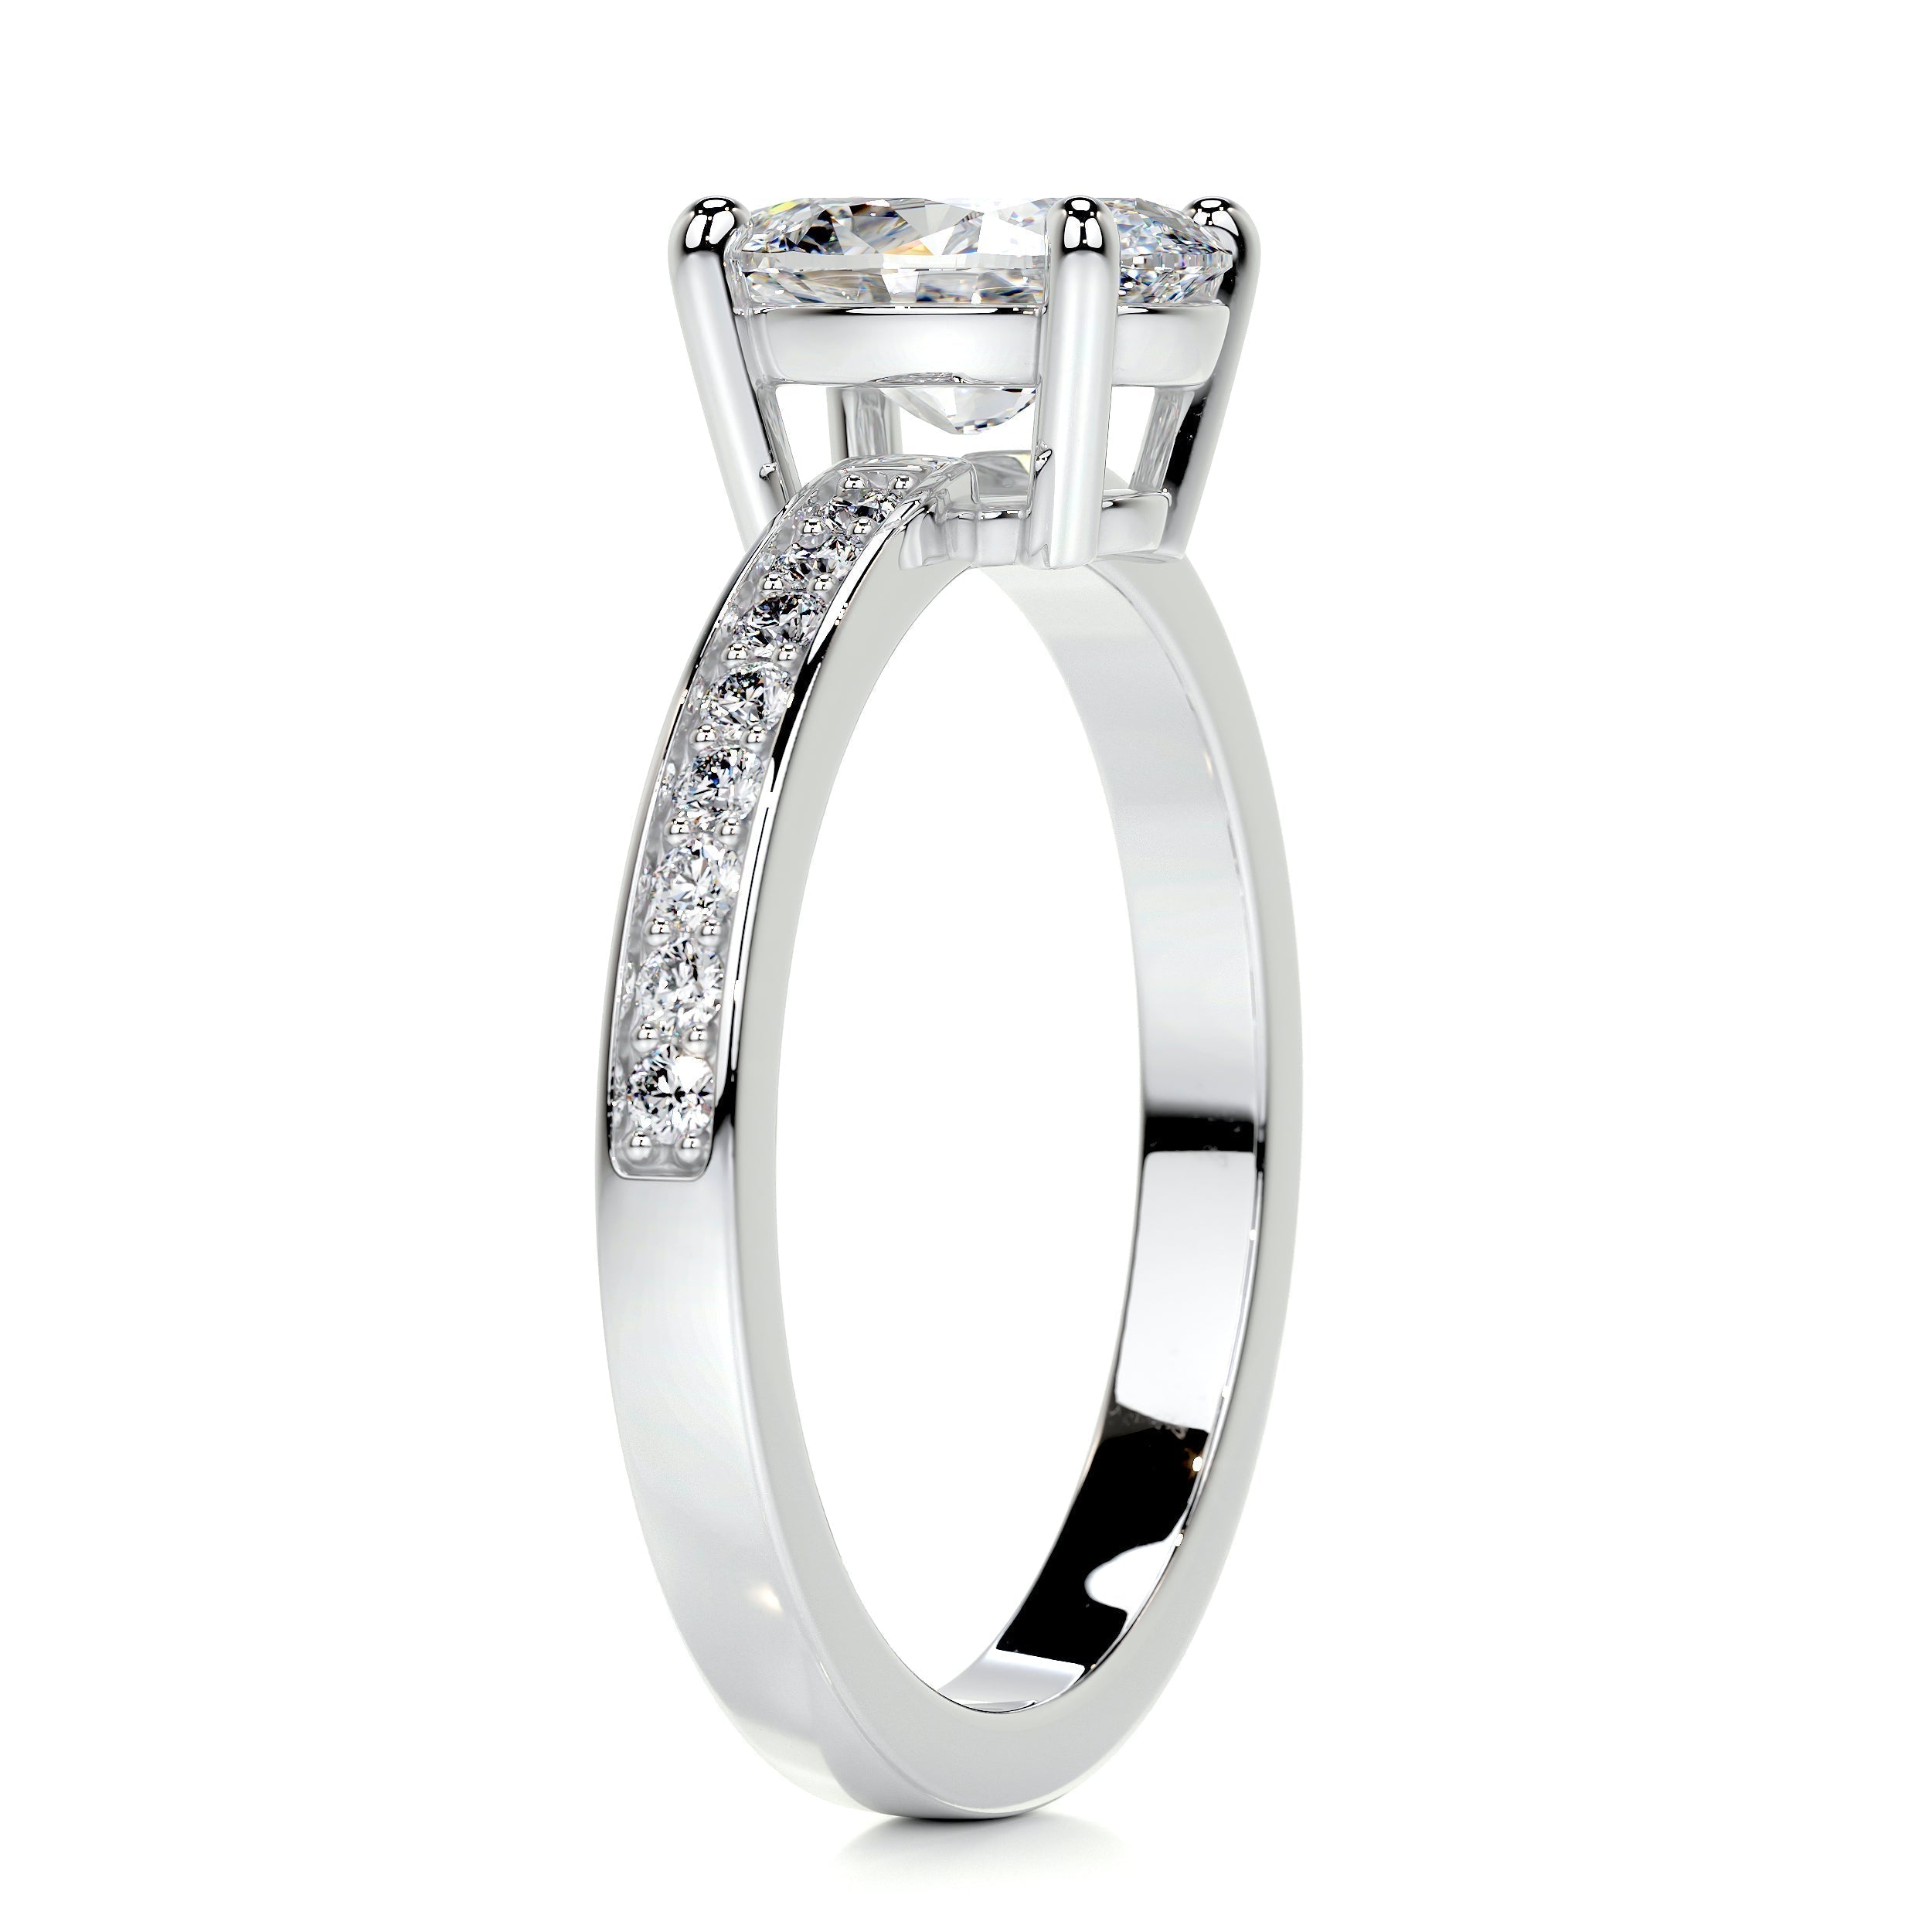 1.0 CT Oval Solitaire CVD F/SI1 Diamond Engagement Ring 8